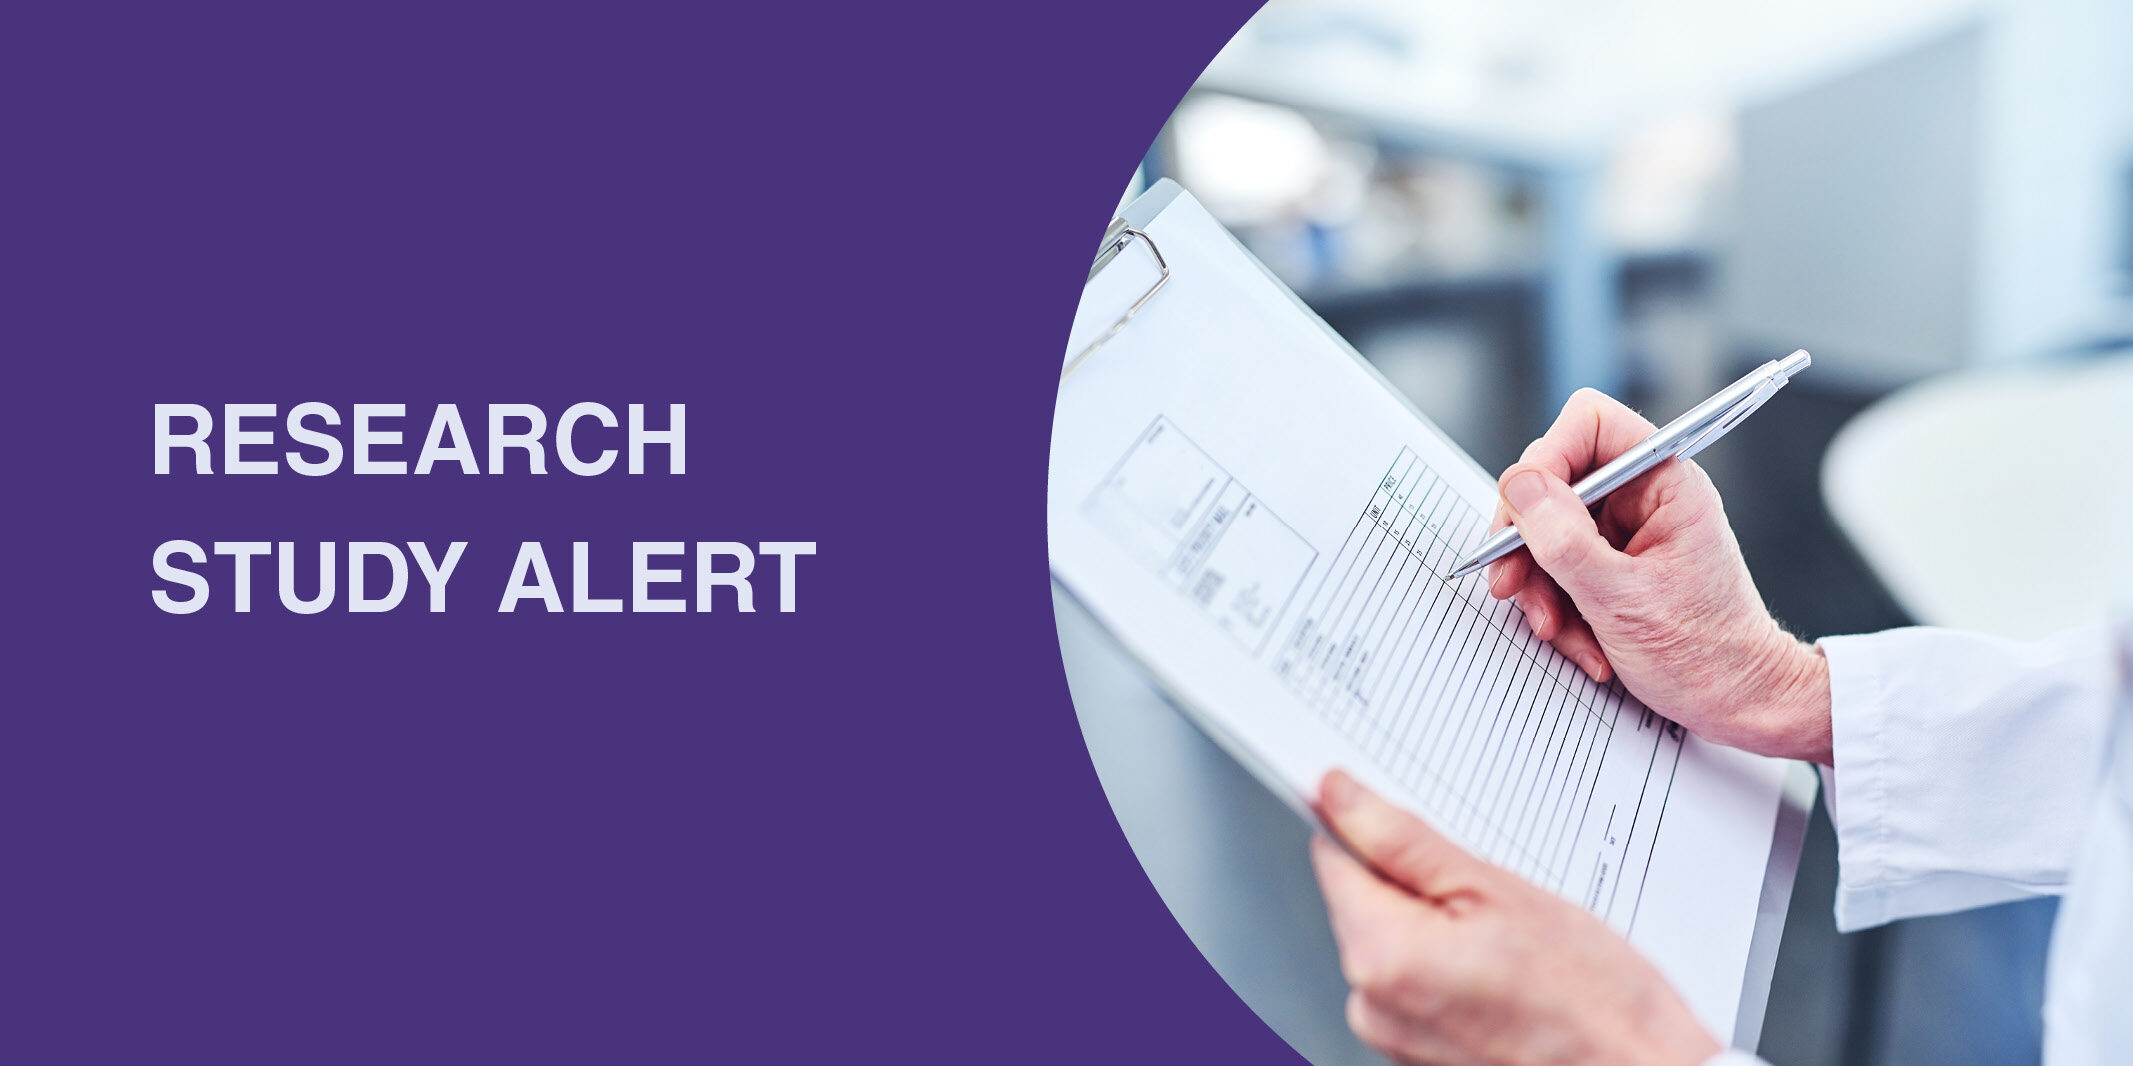 The words "Research Study Alert" on a purple background next to an image of a doctor writing on a clipboard